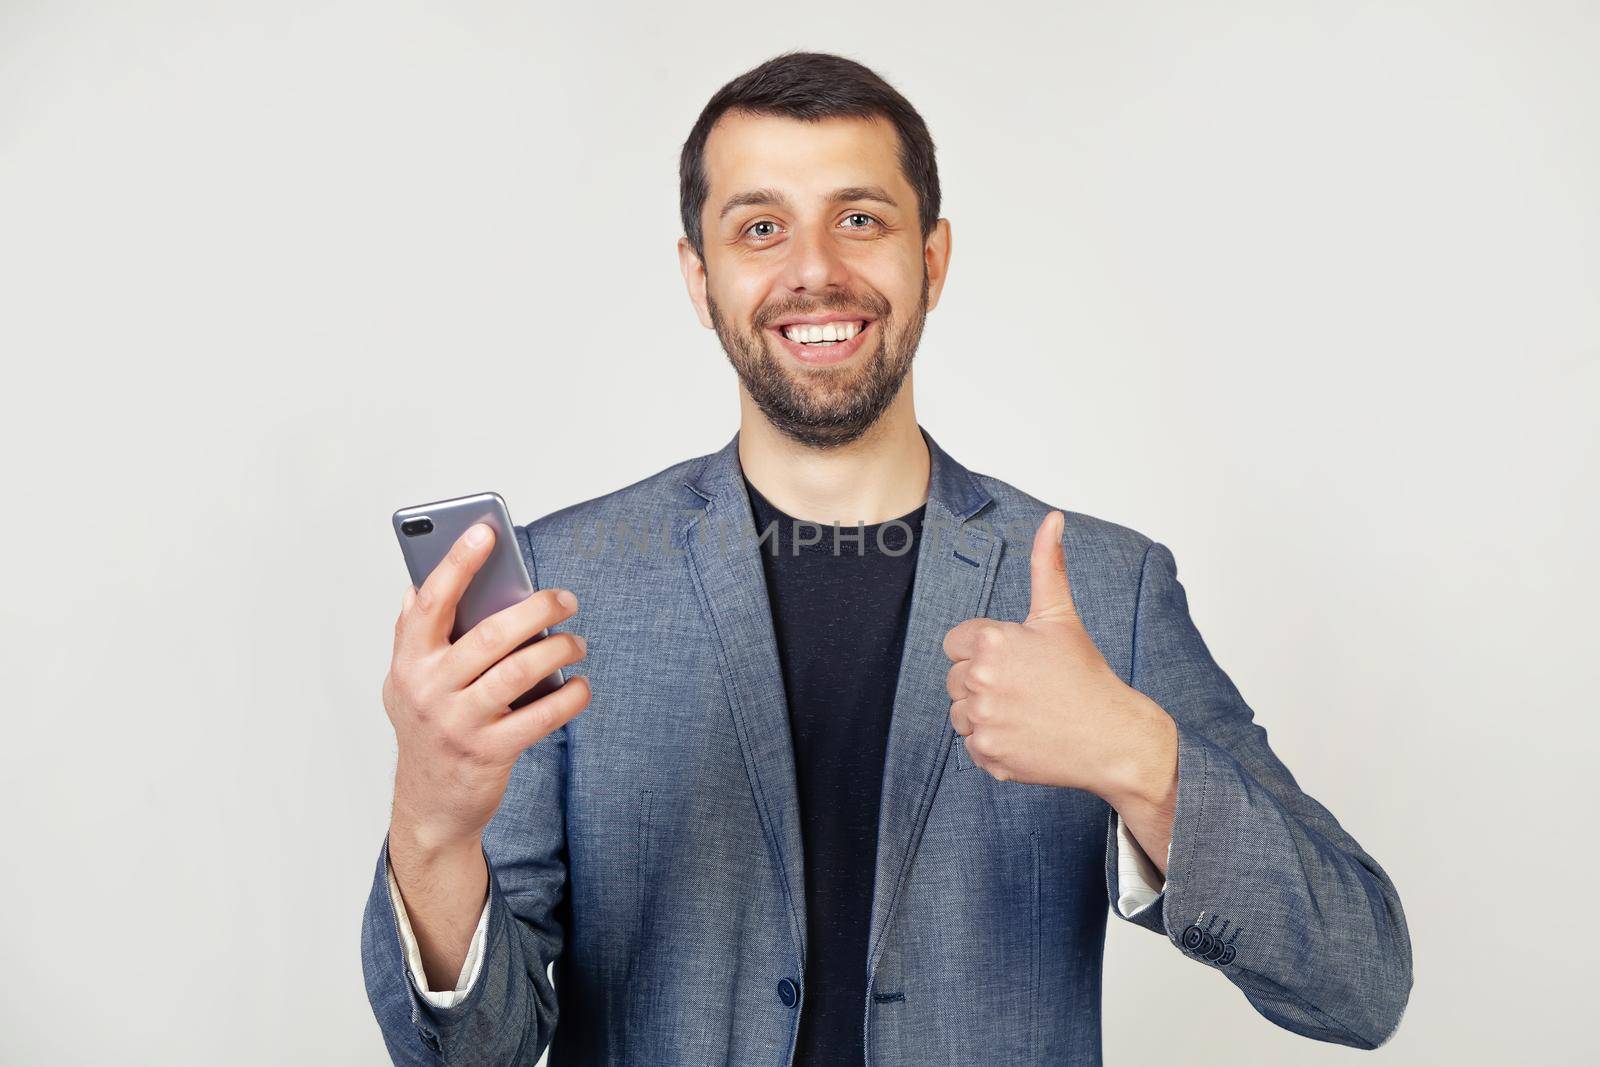 Young businessman with a smile, a man with a beard in a jacket, with a smartphone in his hand, happy with a big smile, makes an OK sign, thumb up with fingers, a great sign. gray background by ViShark